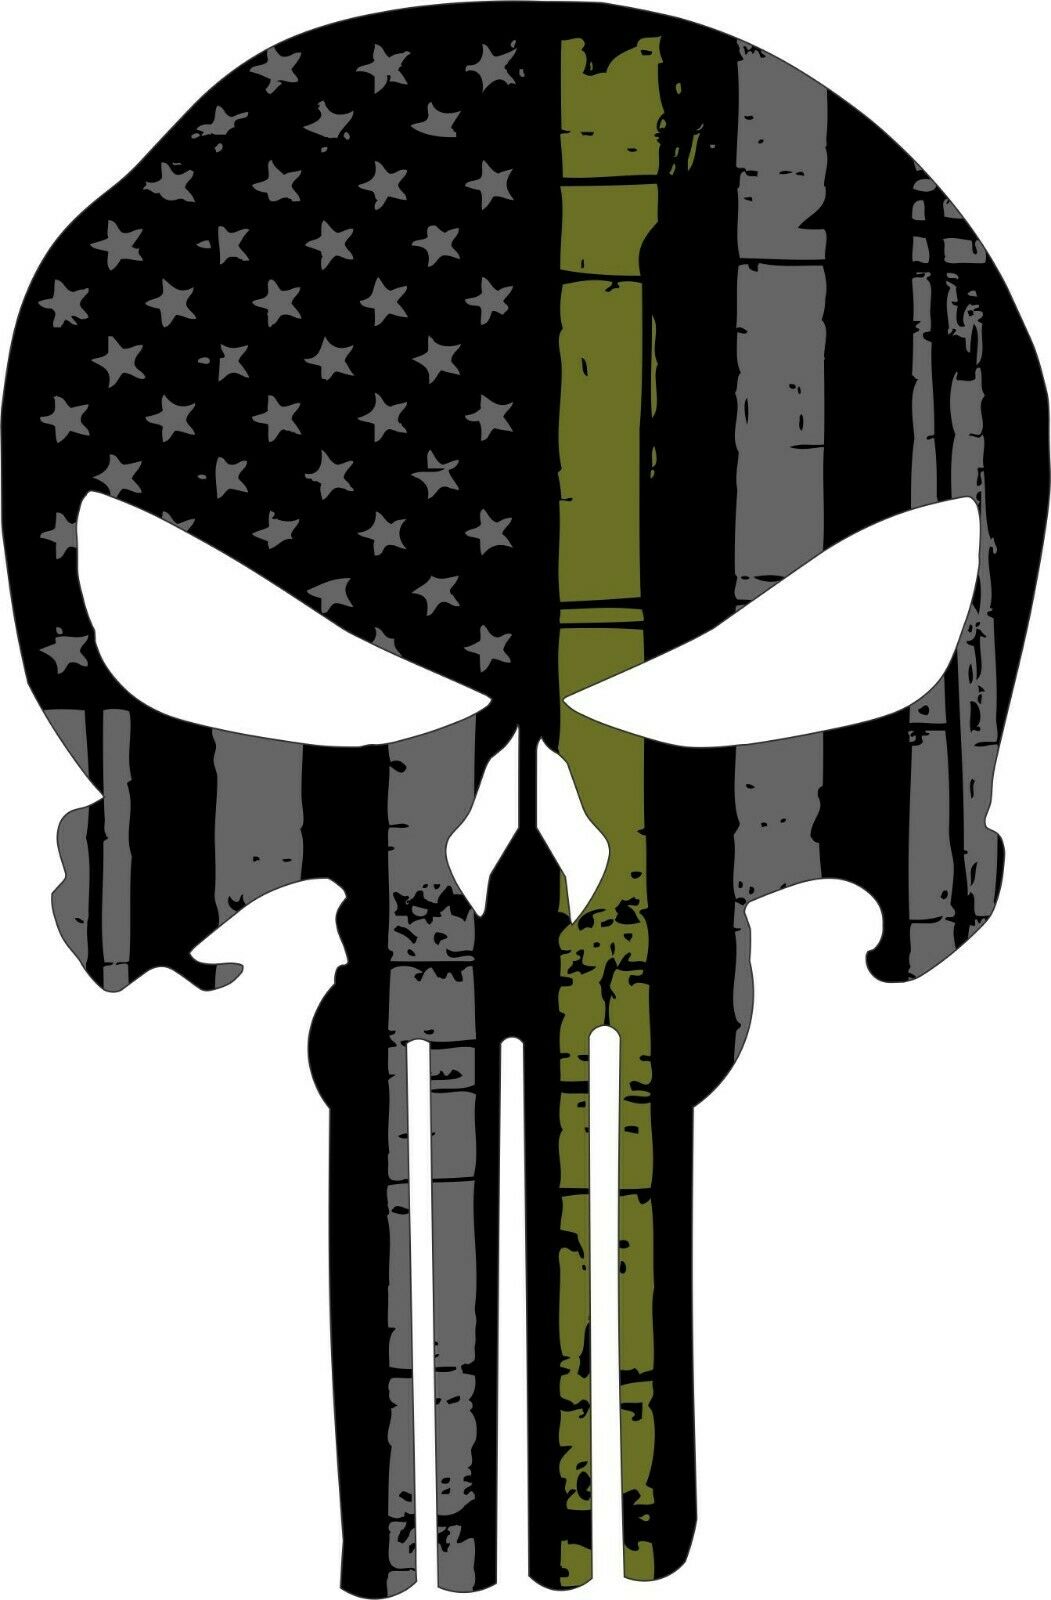 Punisher Skull Decal Subdued Gray Olive Drab Color - Various sizes Free Ship - Powercall Sirens LLC